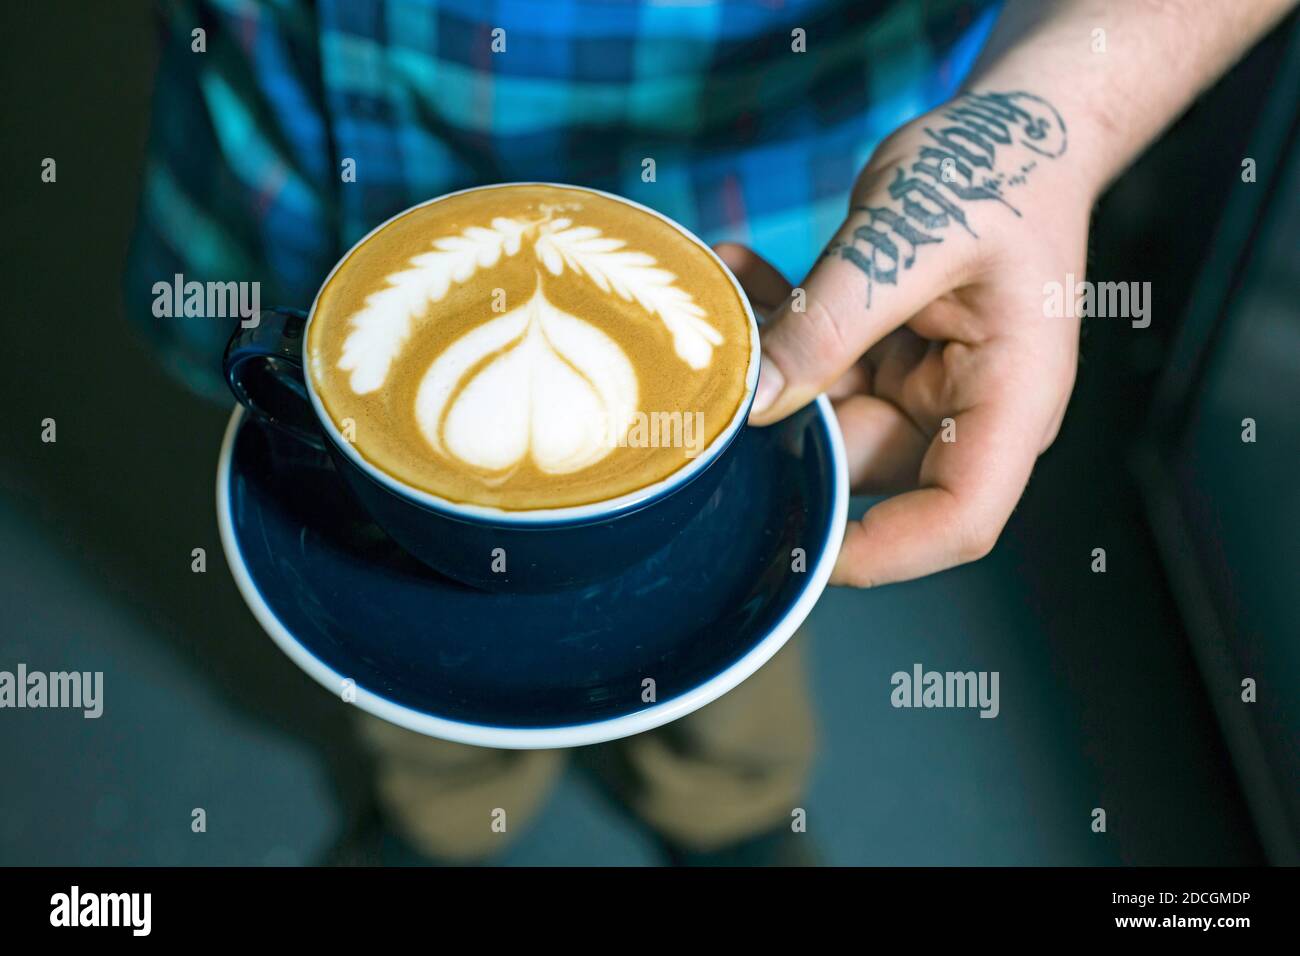 GREAT BRITAIN / England / London/Hand with tatoo holding coffee cup in an indoor cafe in London.Close up of hands holding cup of coffee. Stock Photo